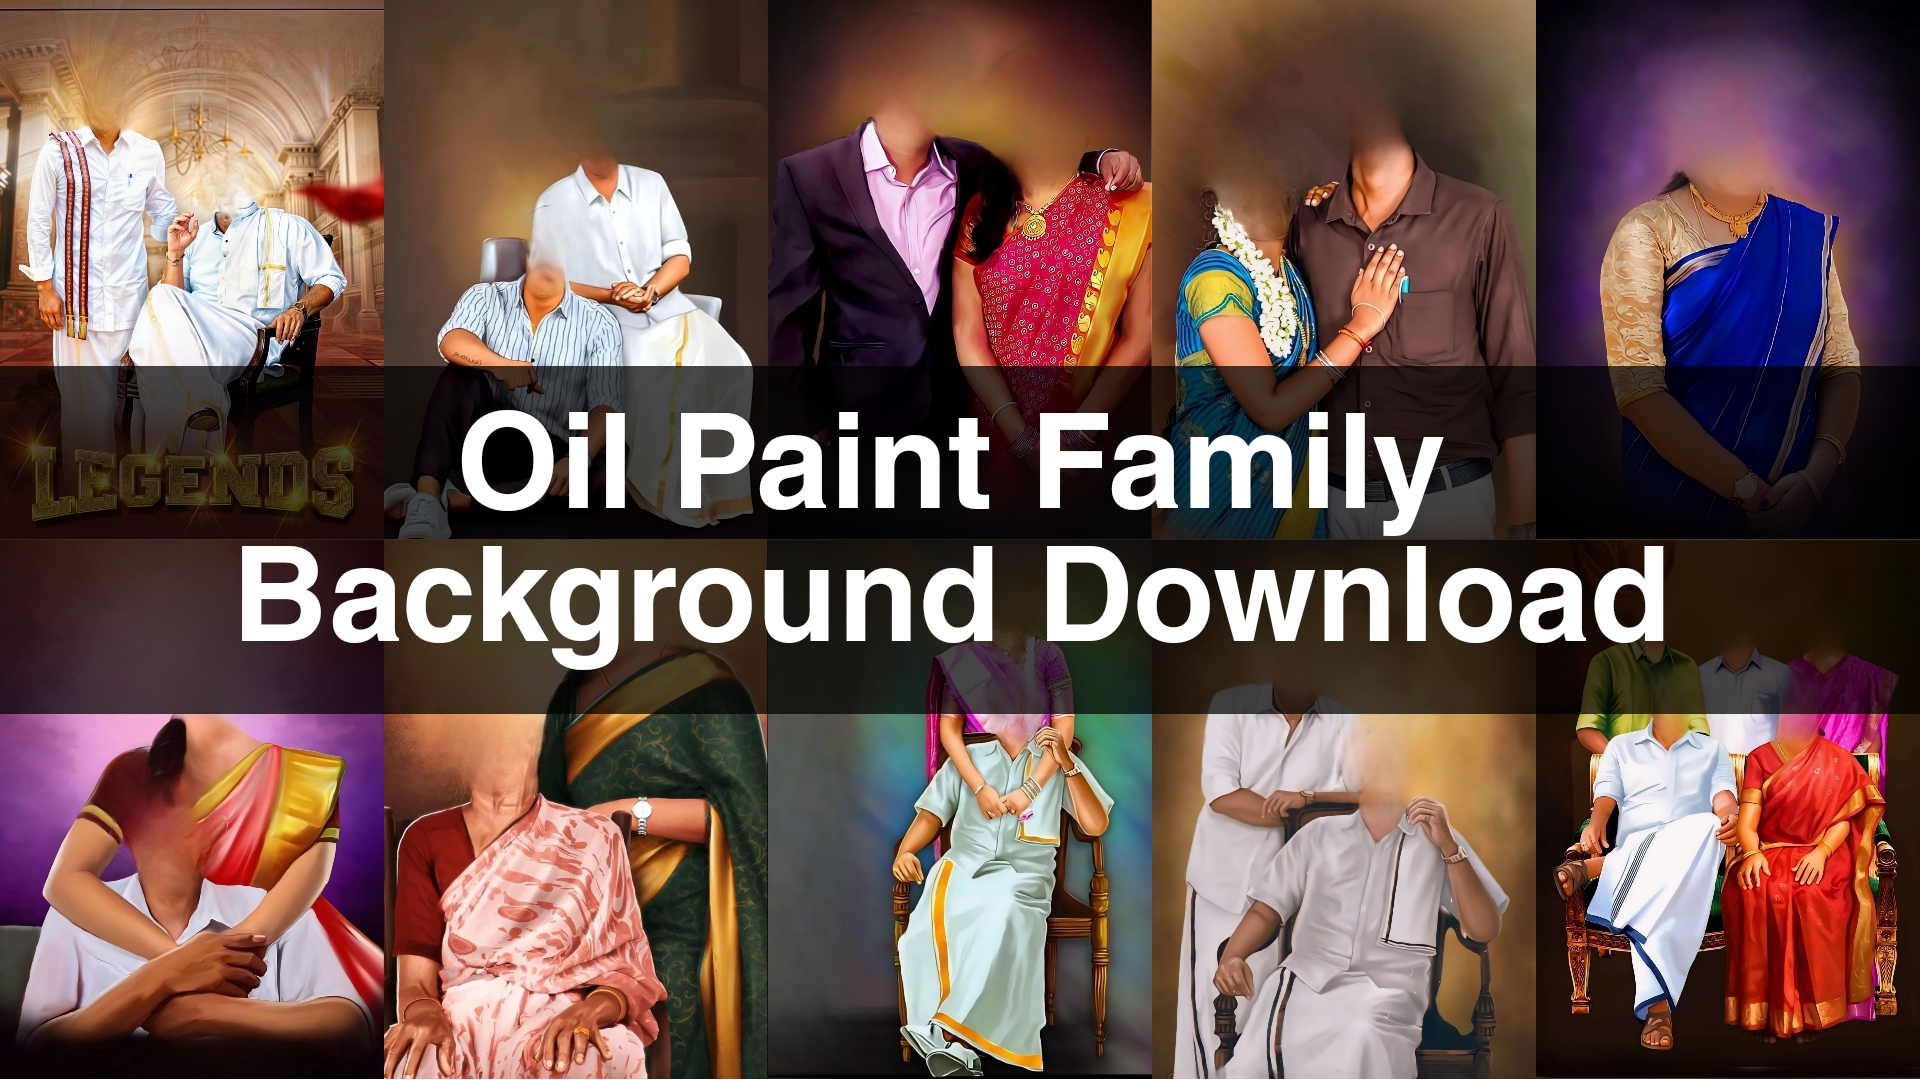 Oil Paint Family Background Download